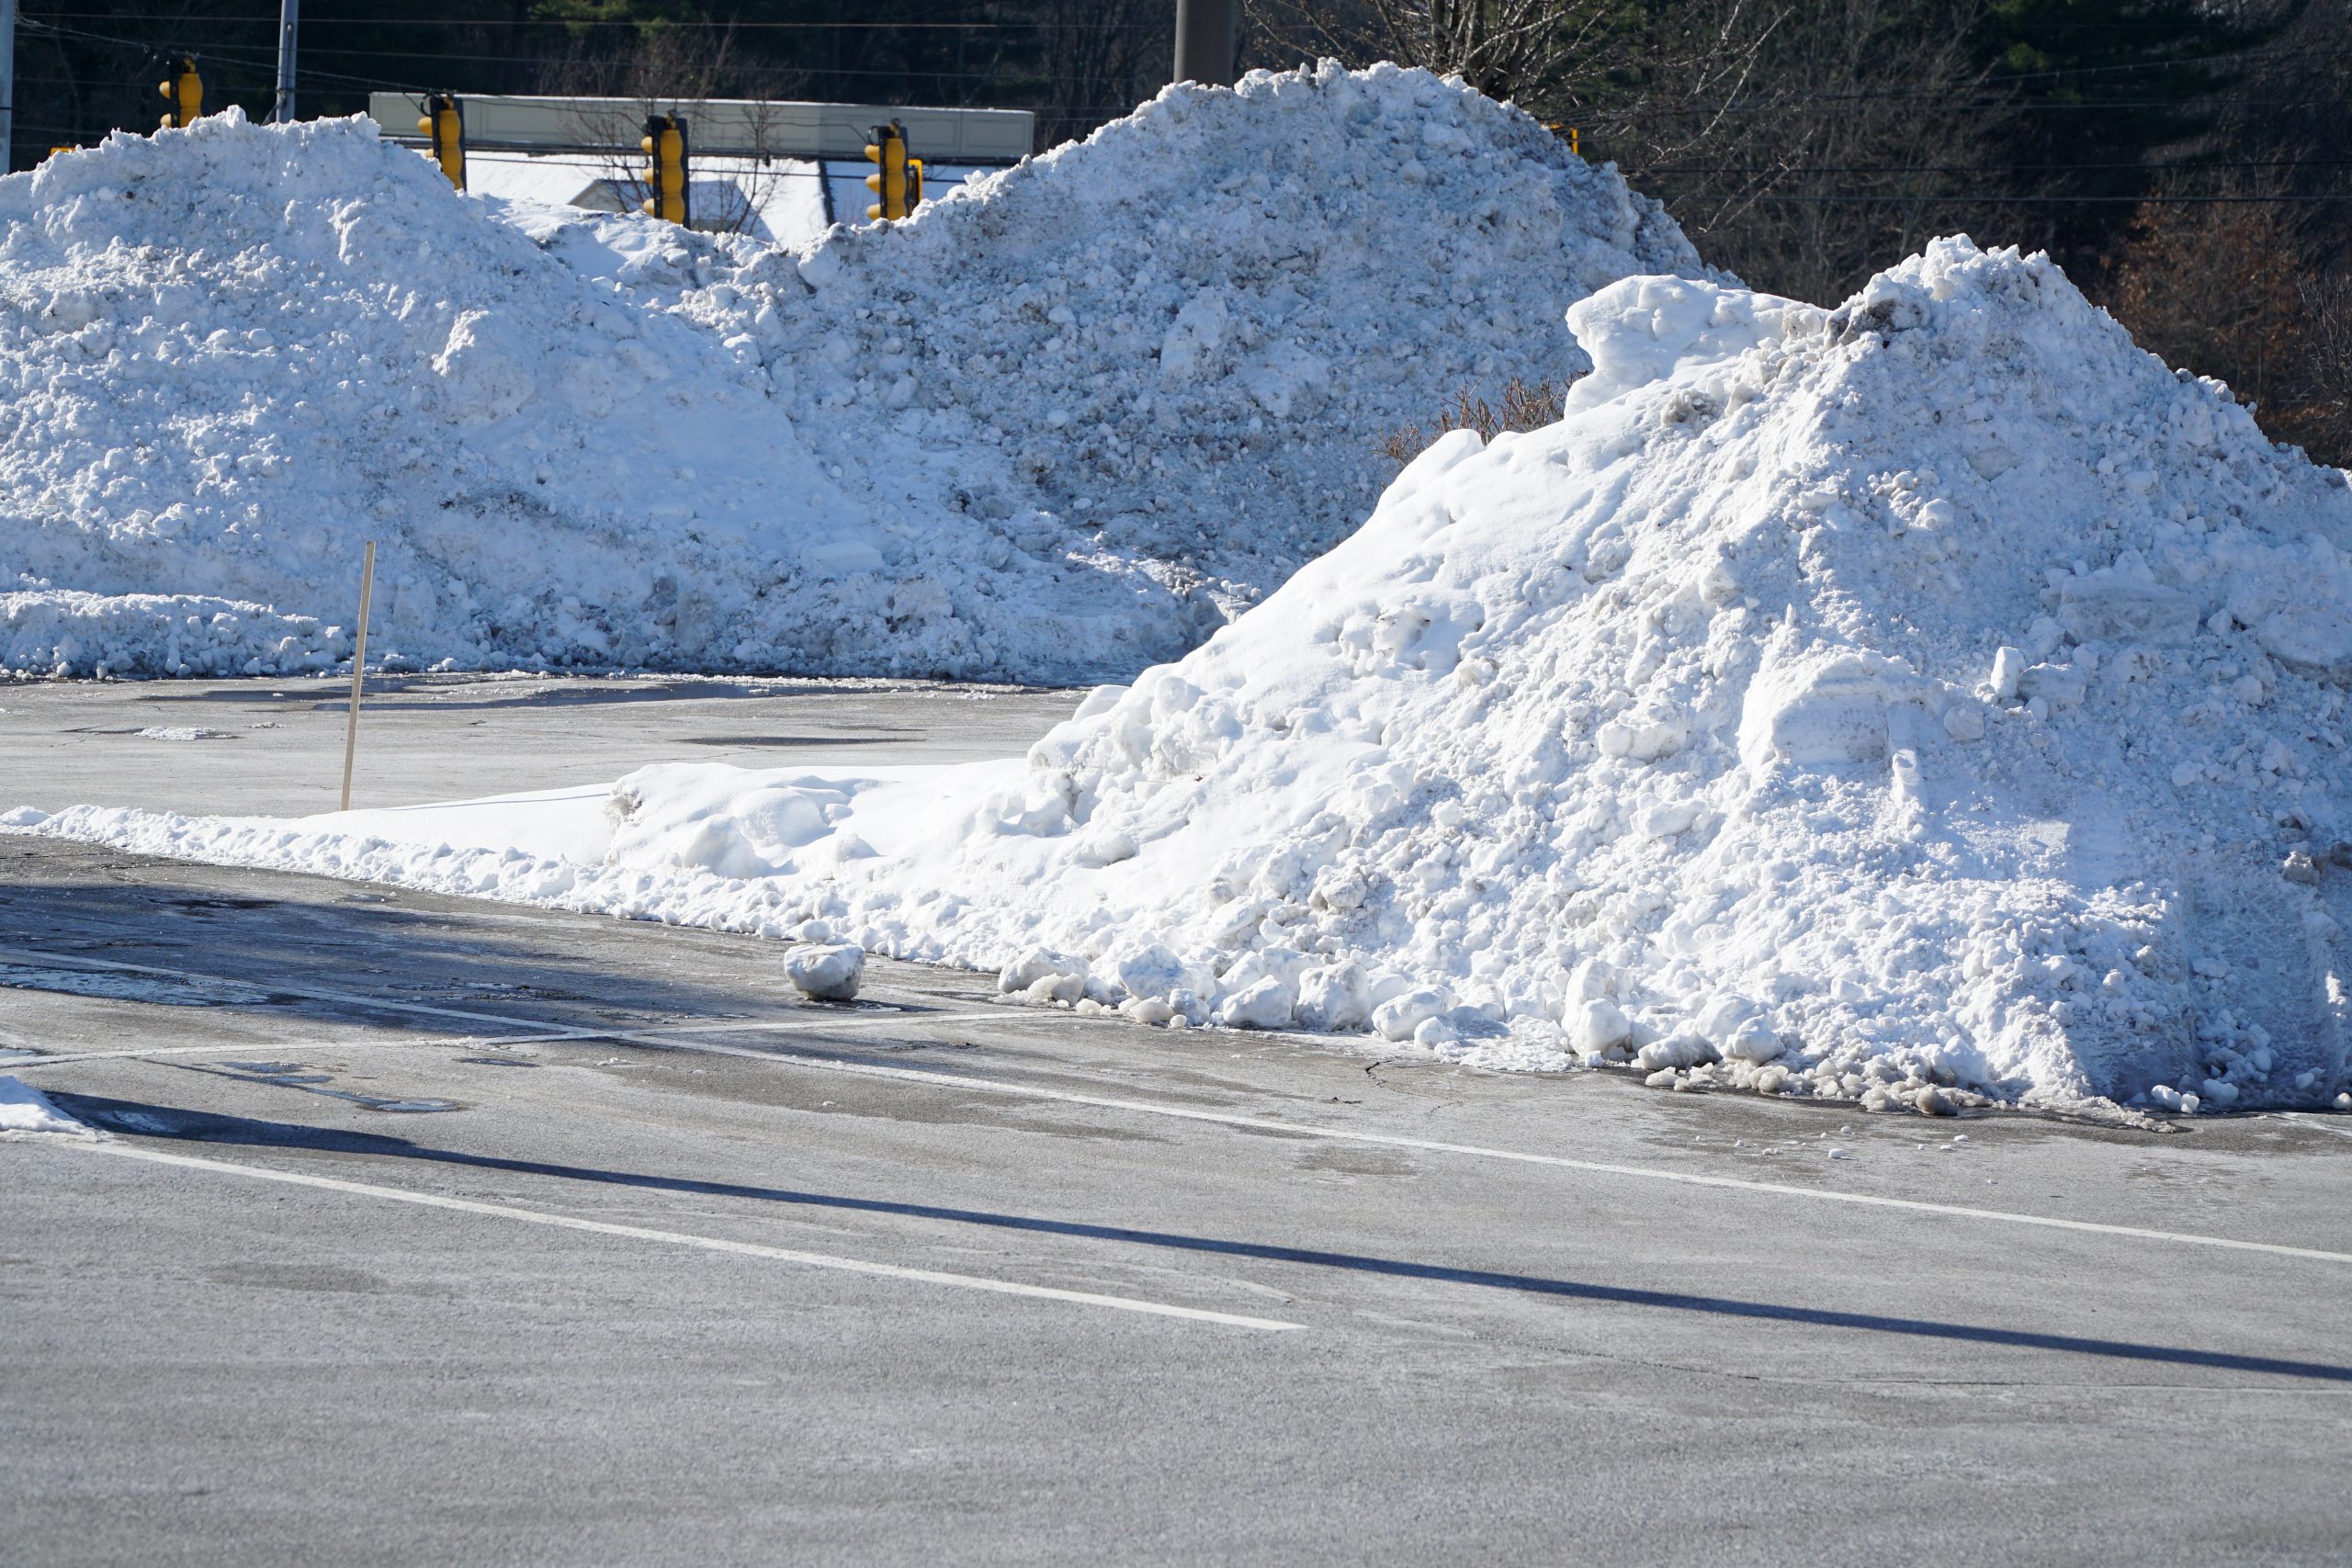 Best Practices for Municipal Snow Removal and Deicing